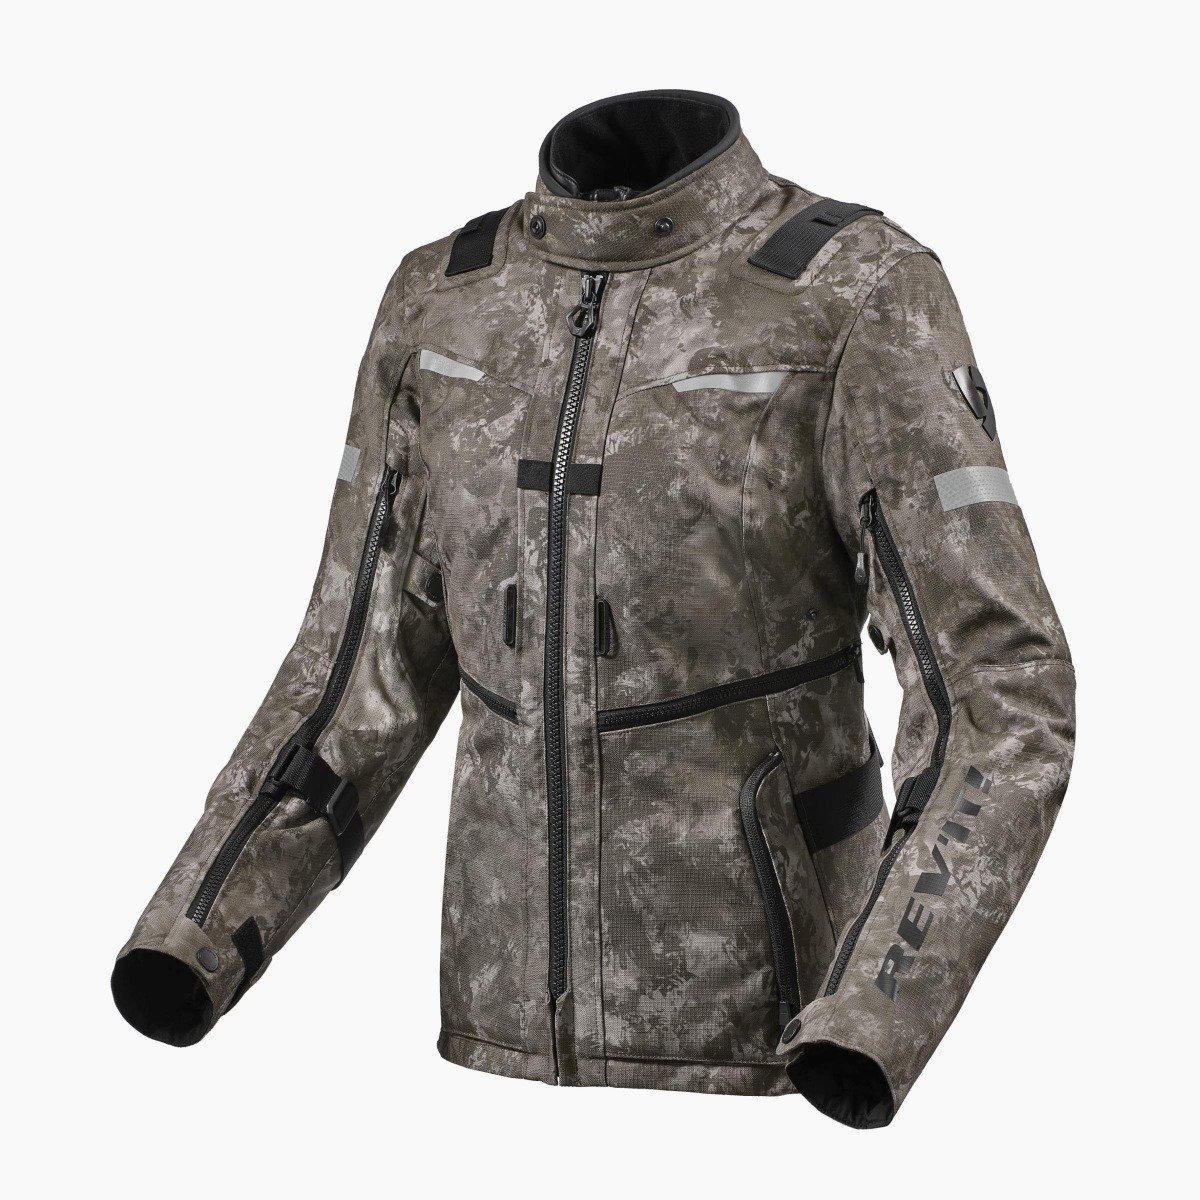 Image of REV'IT! Sand 4 H2O Jacket Lady Camo Brown Size 36 ID 8700001311601